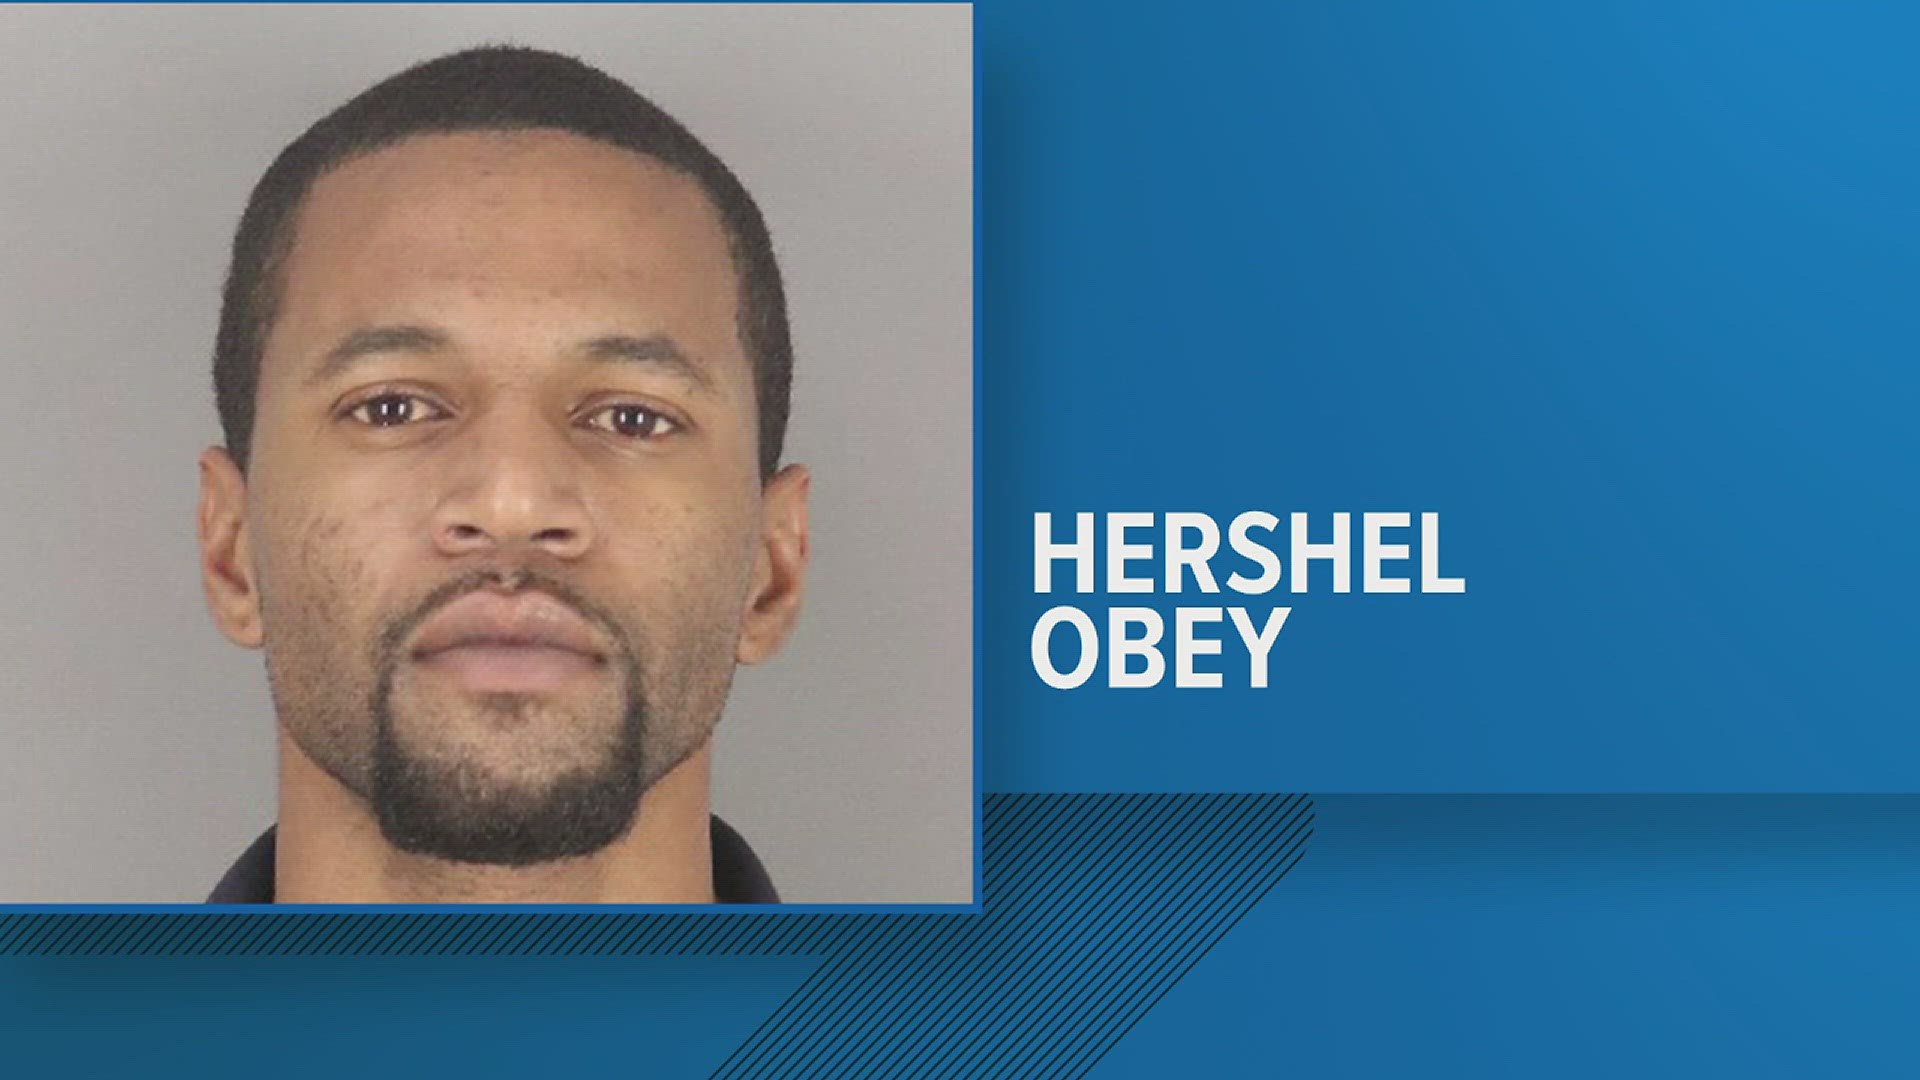 Hershel Obey was first arrested in 2020 by Port Arthur police after over a week of searching.